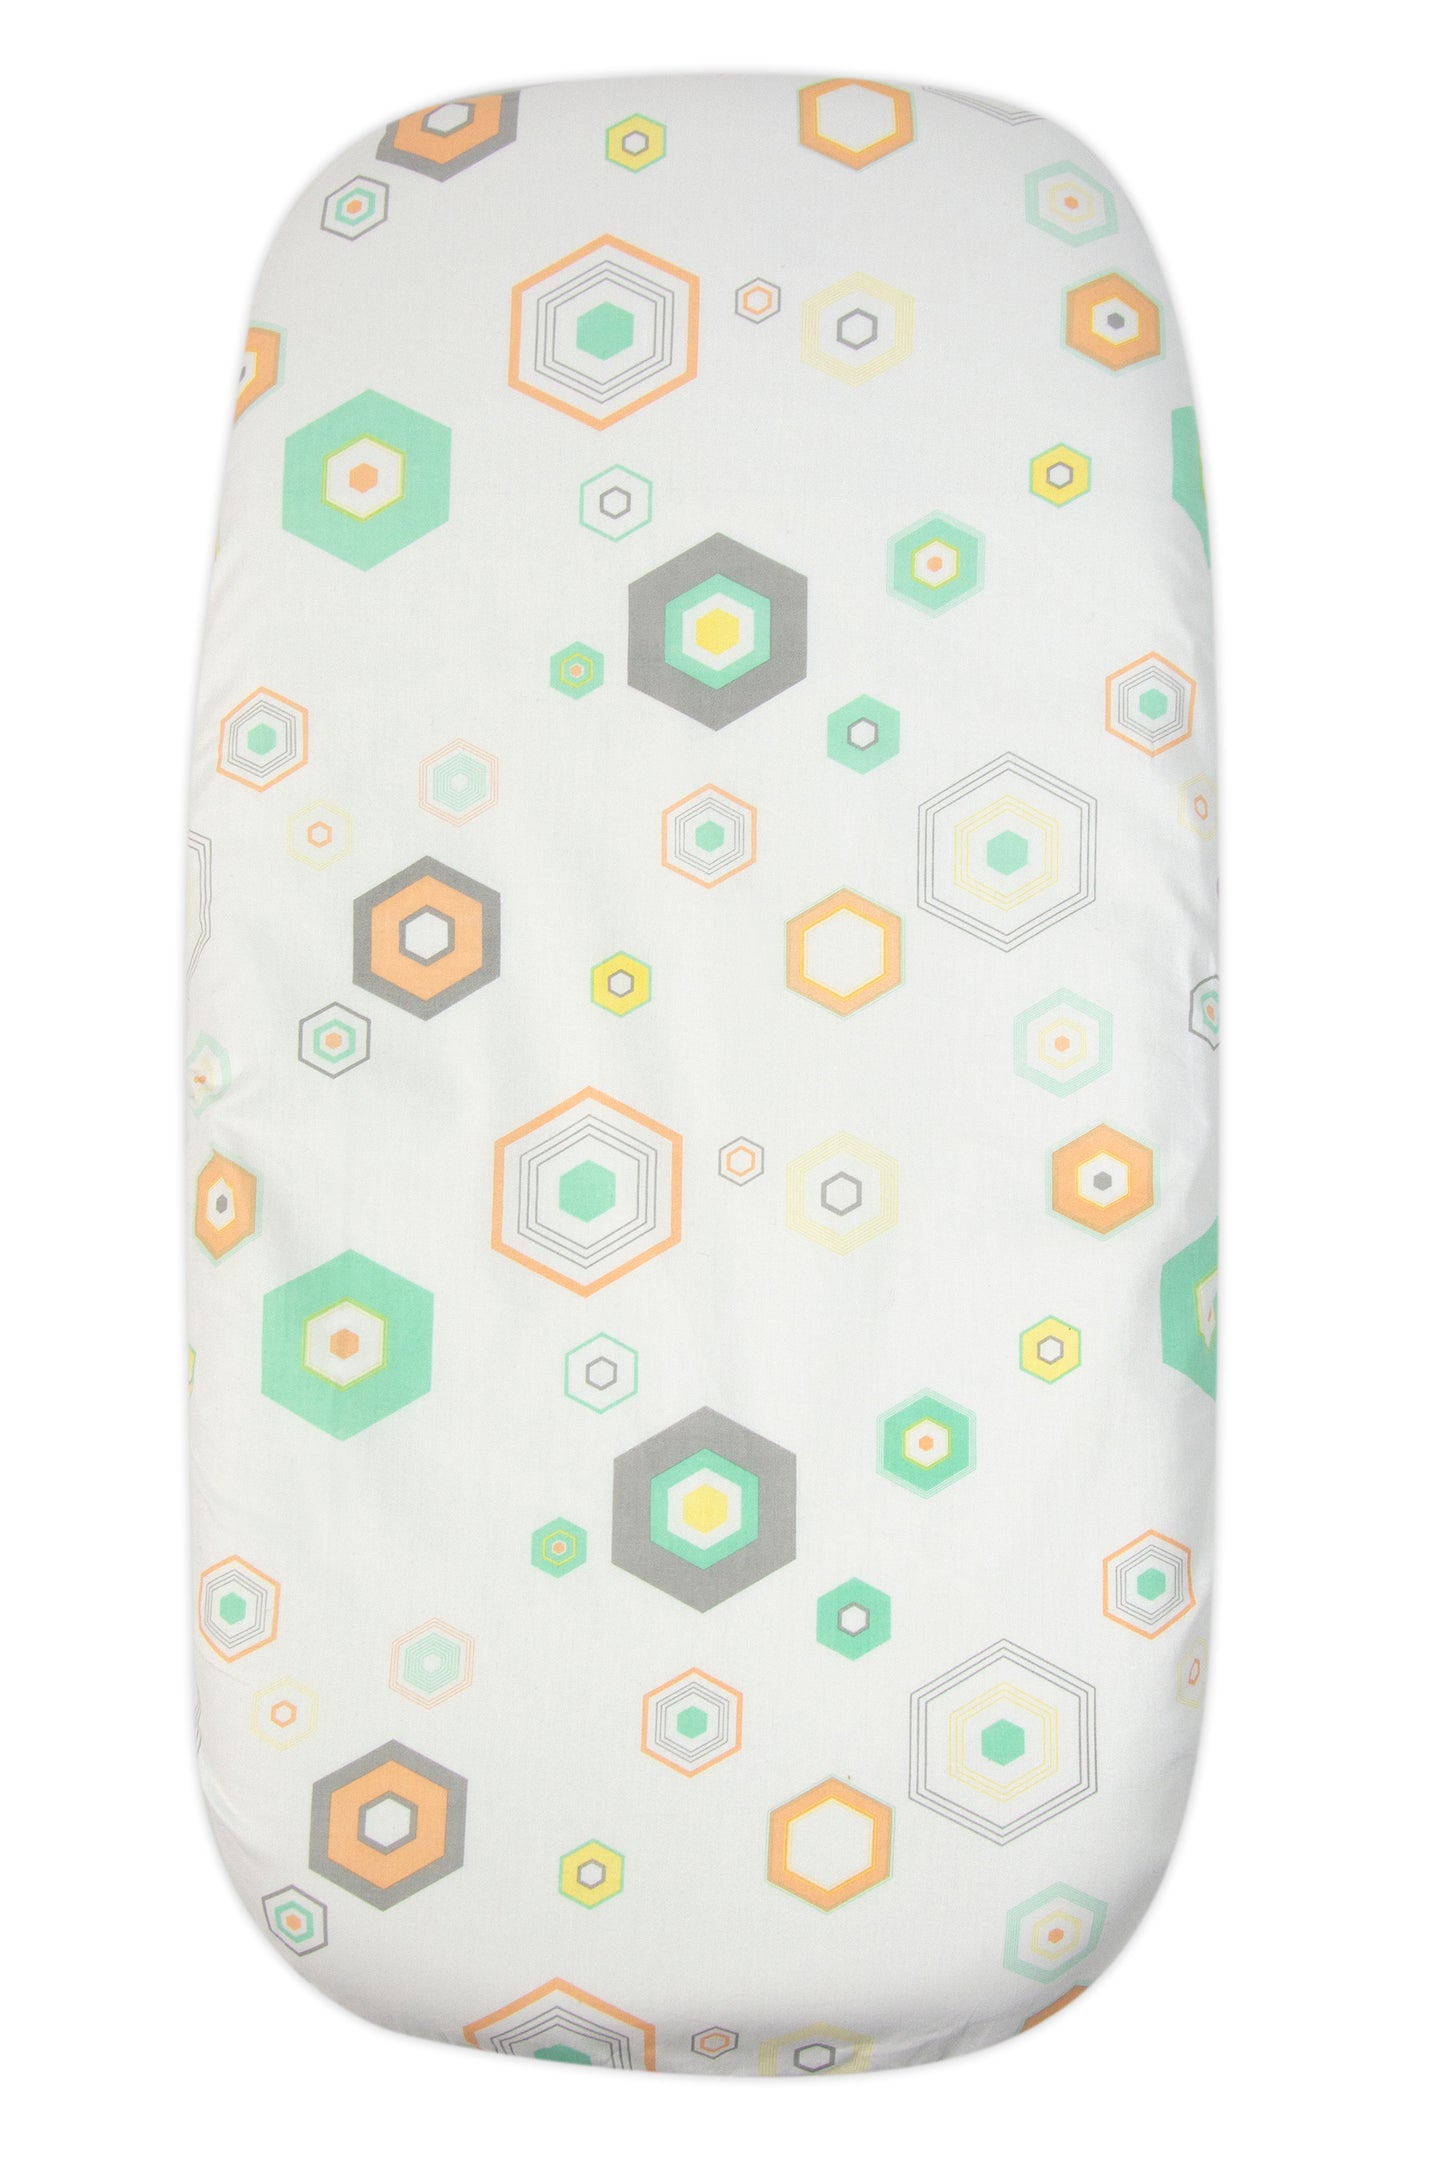 HEXAGON  FITTED COT SHEET - WEEGO